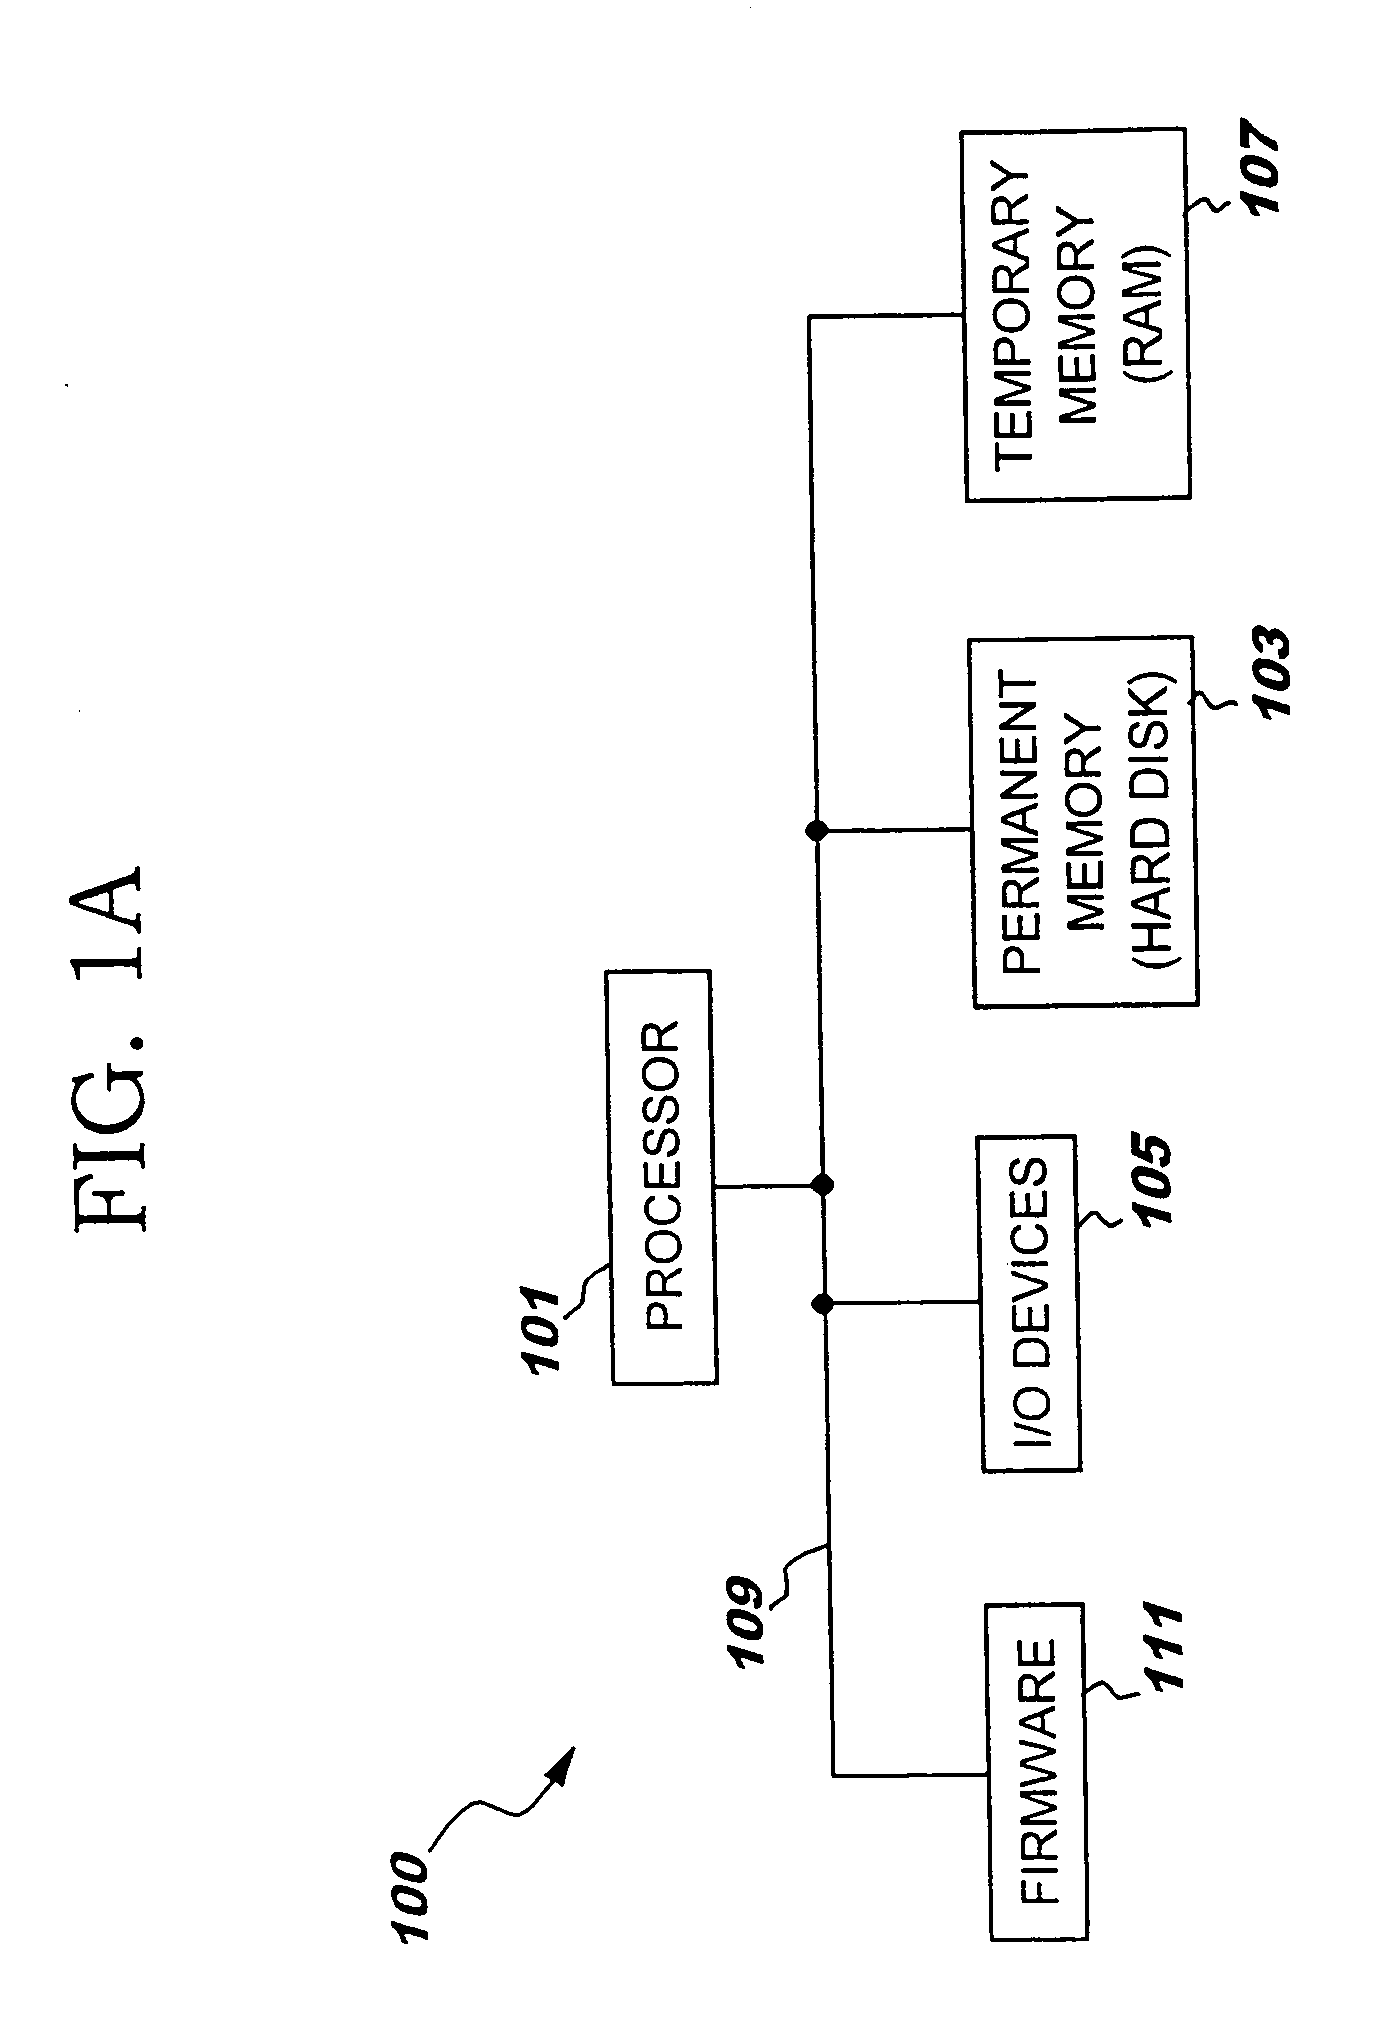 XML-based system and method for collaborative web-based design and verification of system-on-a-chip